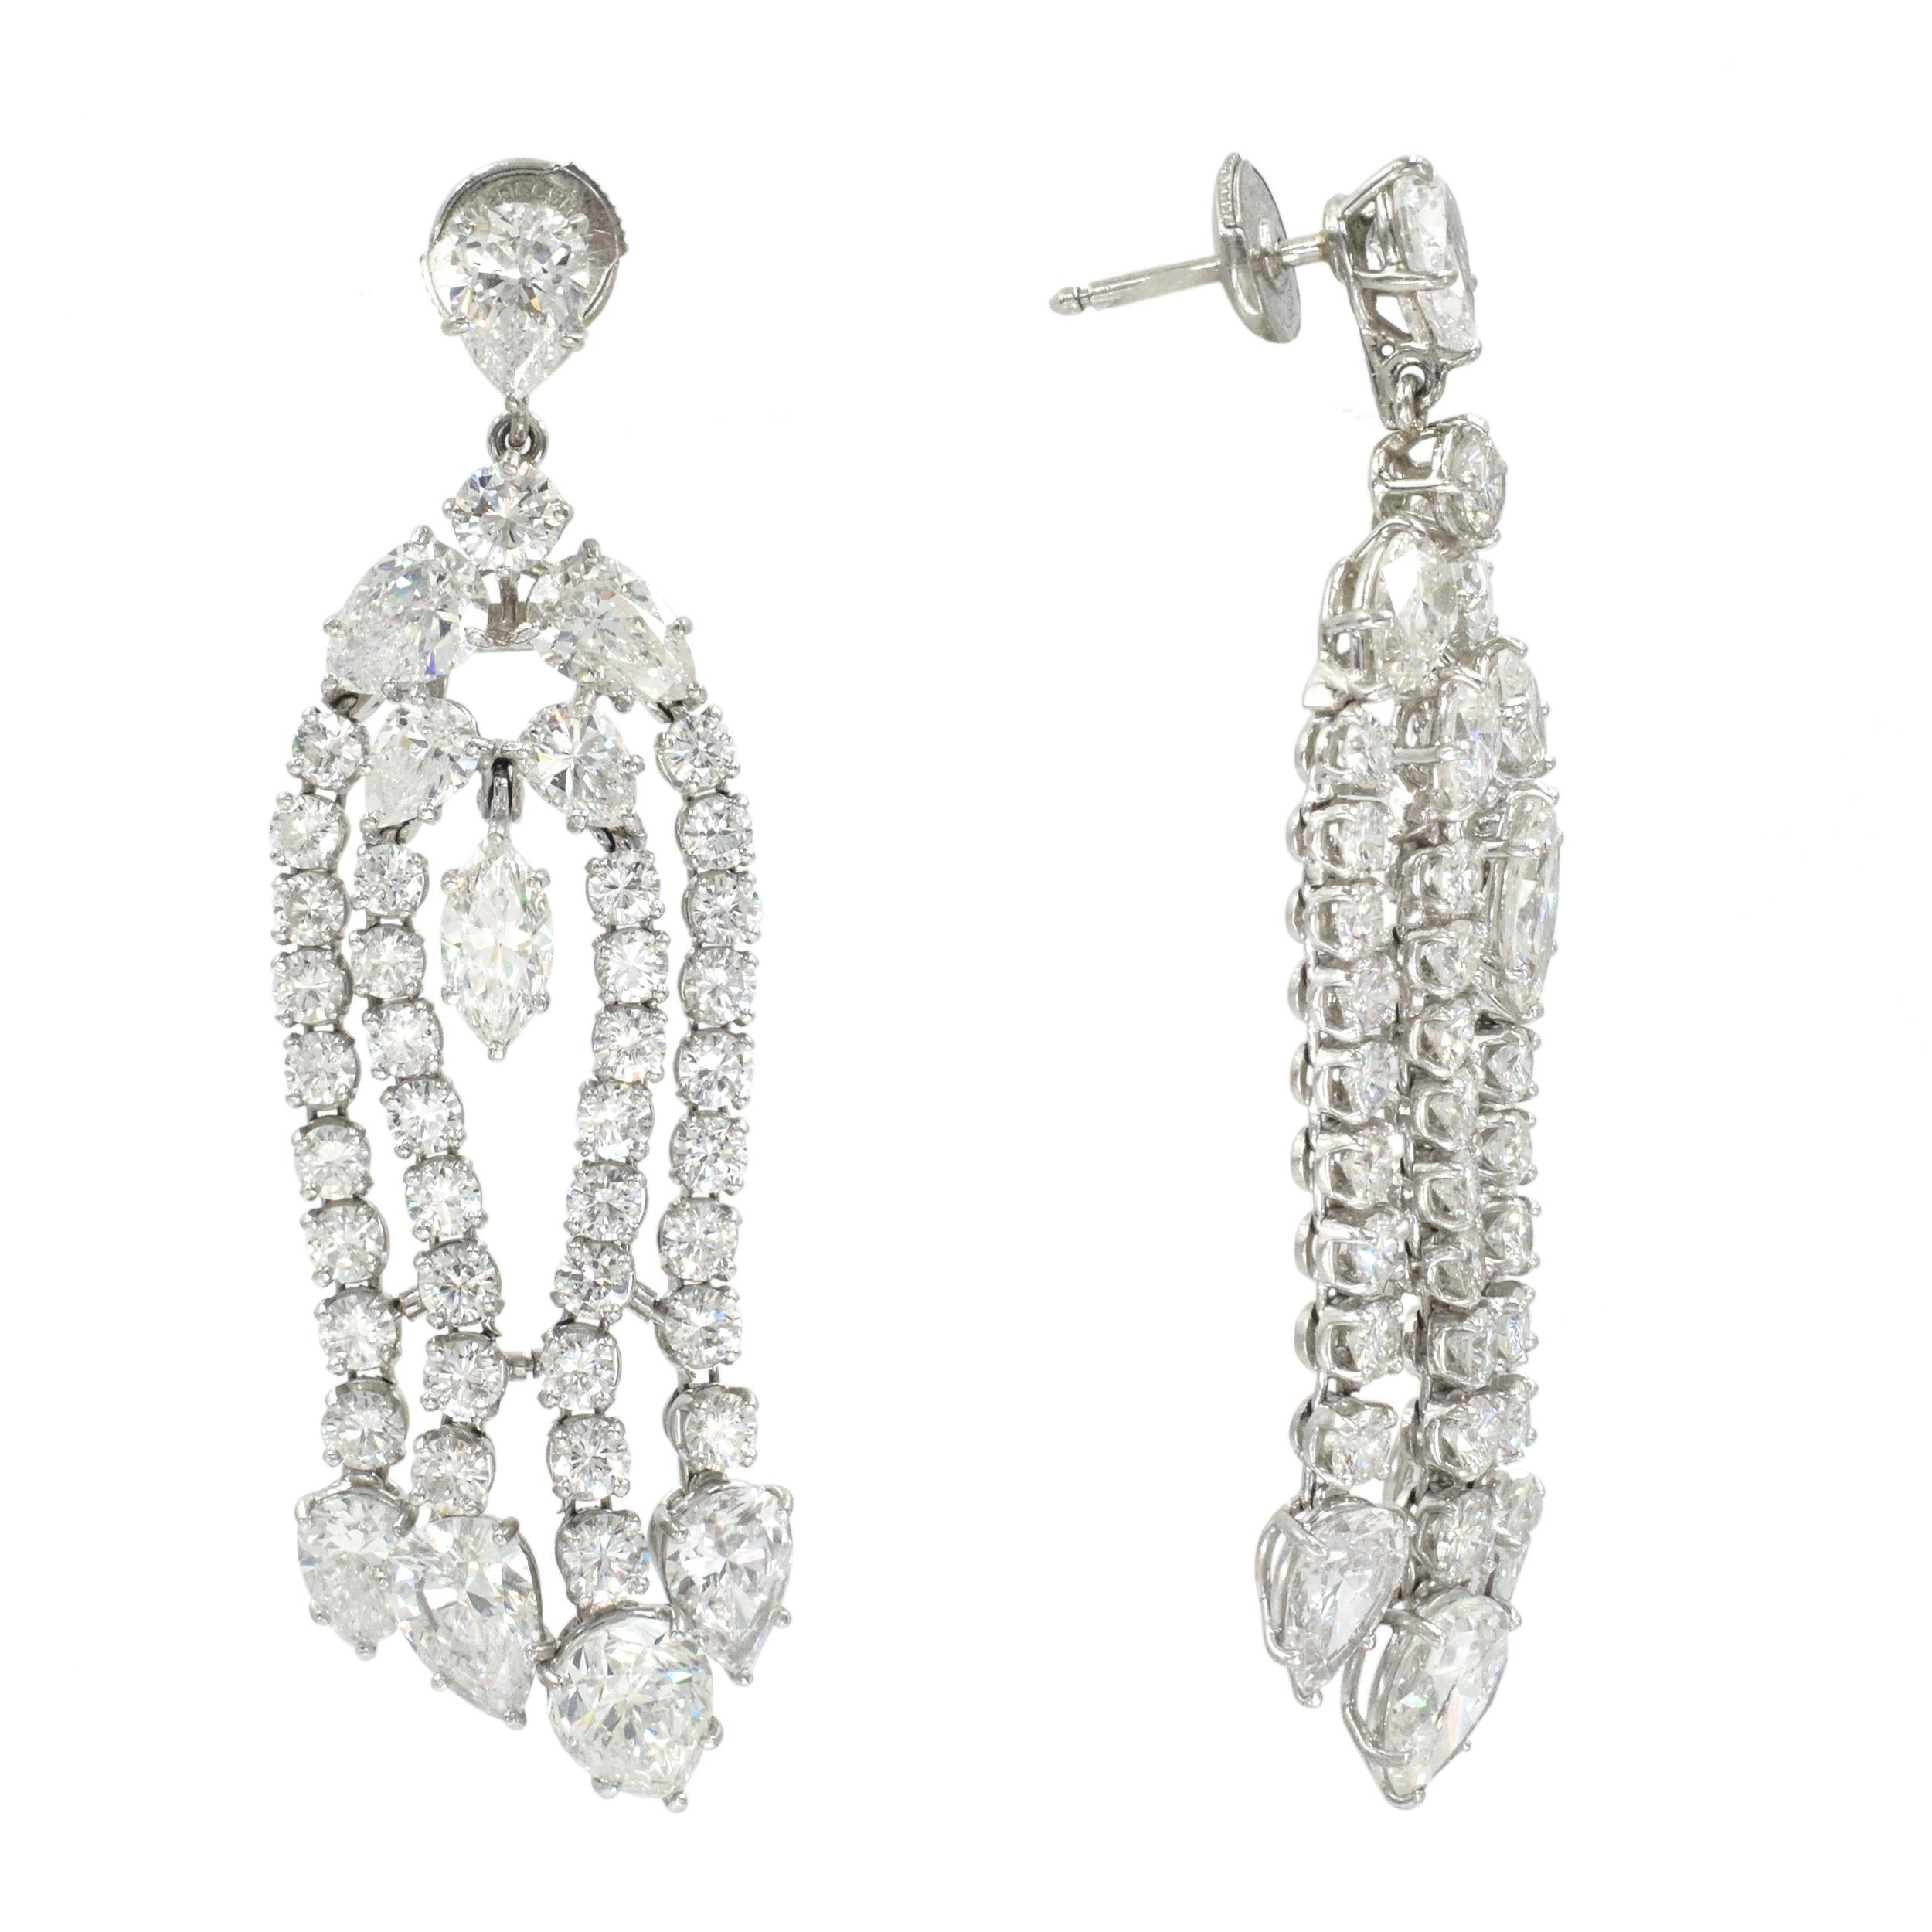 Harry Winston Diamond Earrings In Excellent Condition For Sale In New York, NY